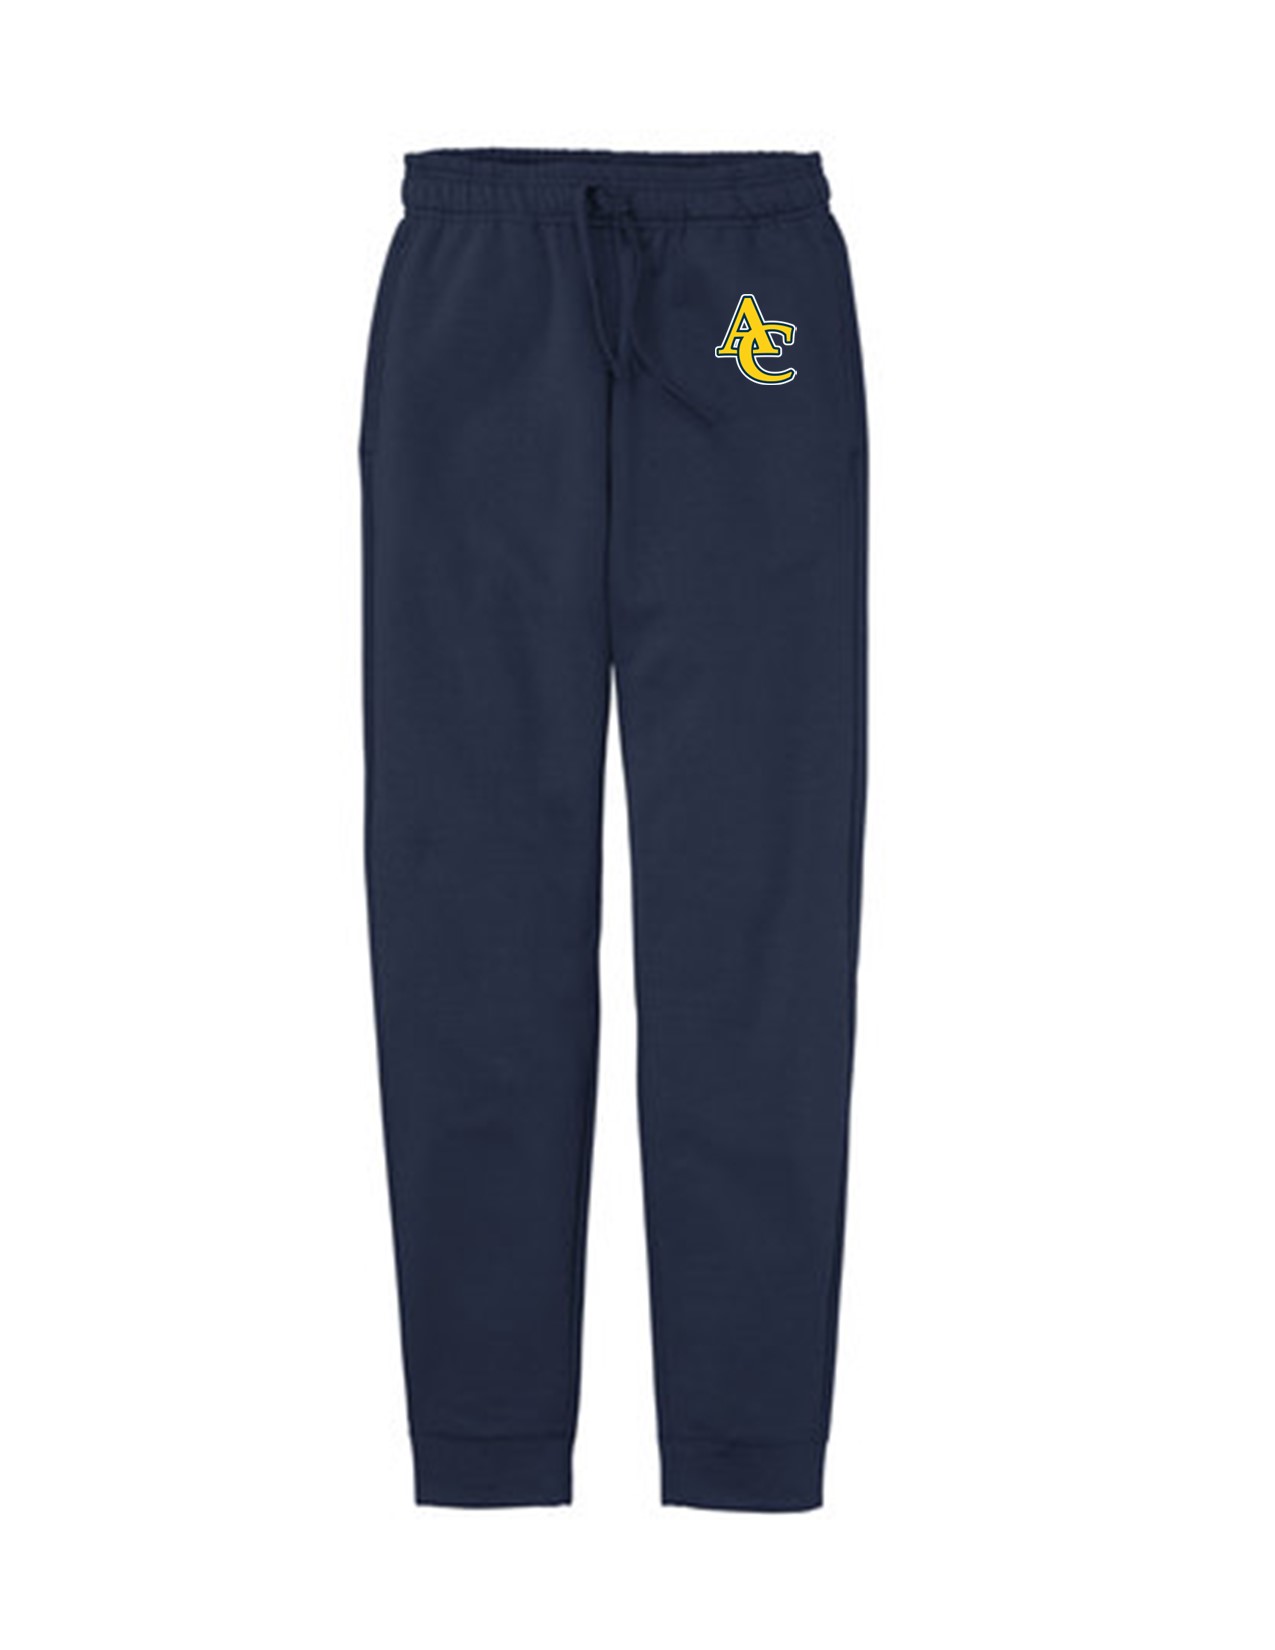 86 Port and Co PC78J Adult Core Fleece Jogger with Embroidery